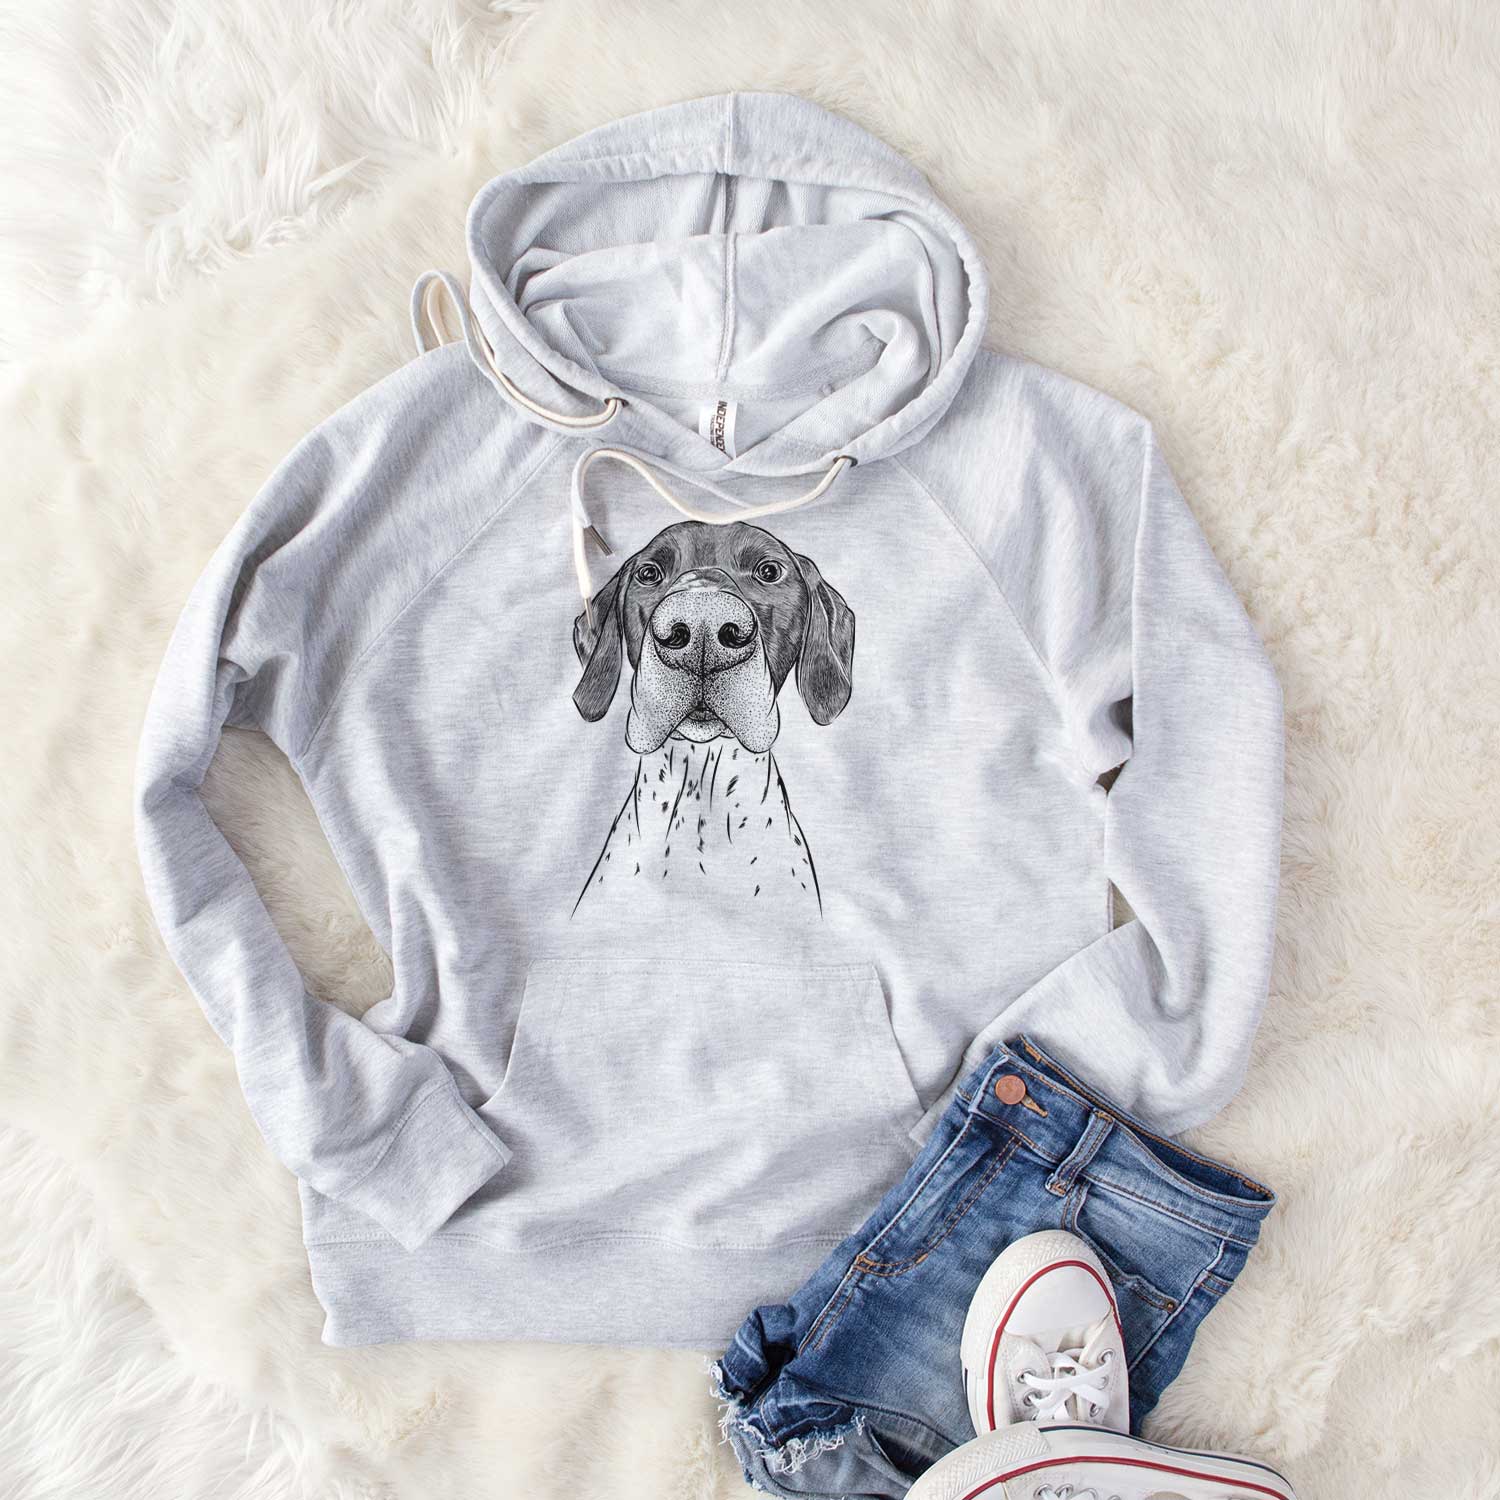 Booze the German Shorthaired Pointer - Unisex Loopback Terry Hoodie